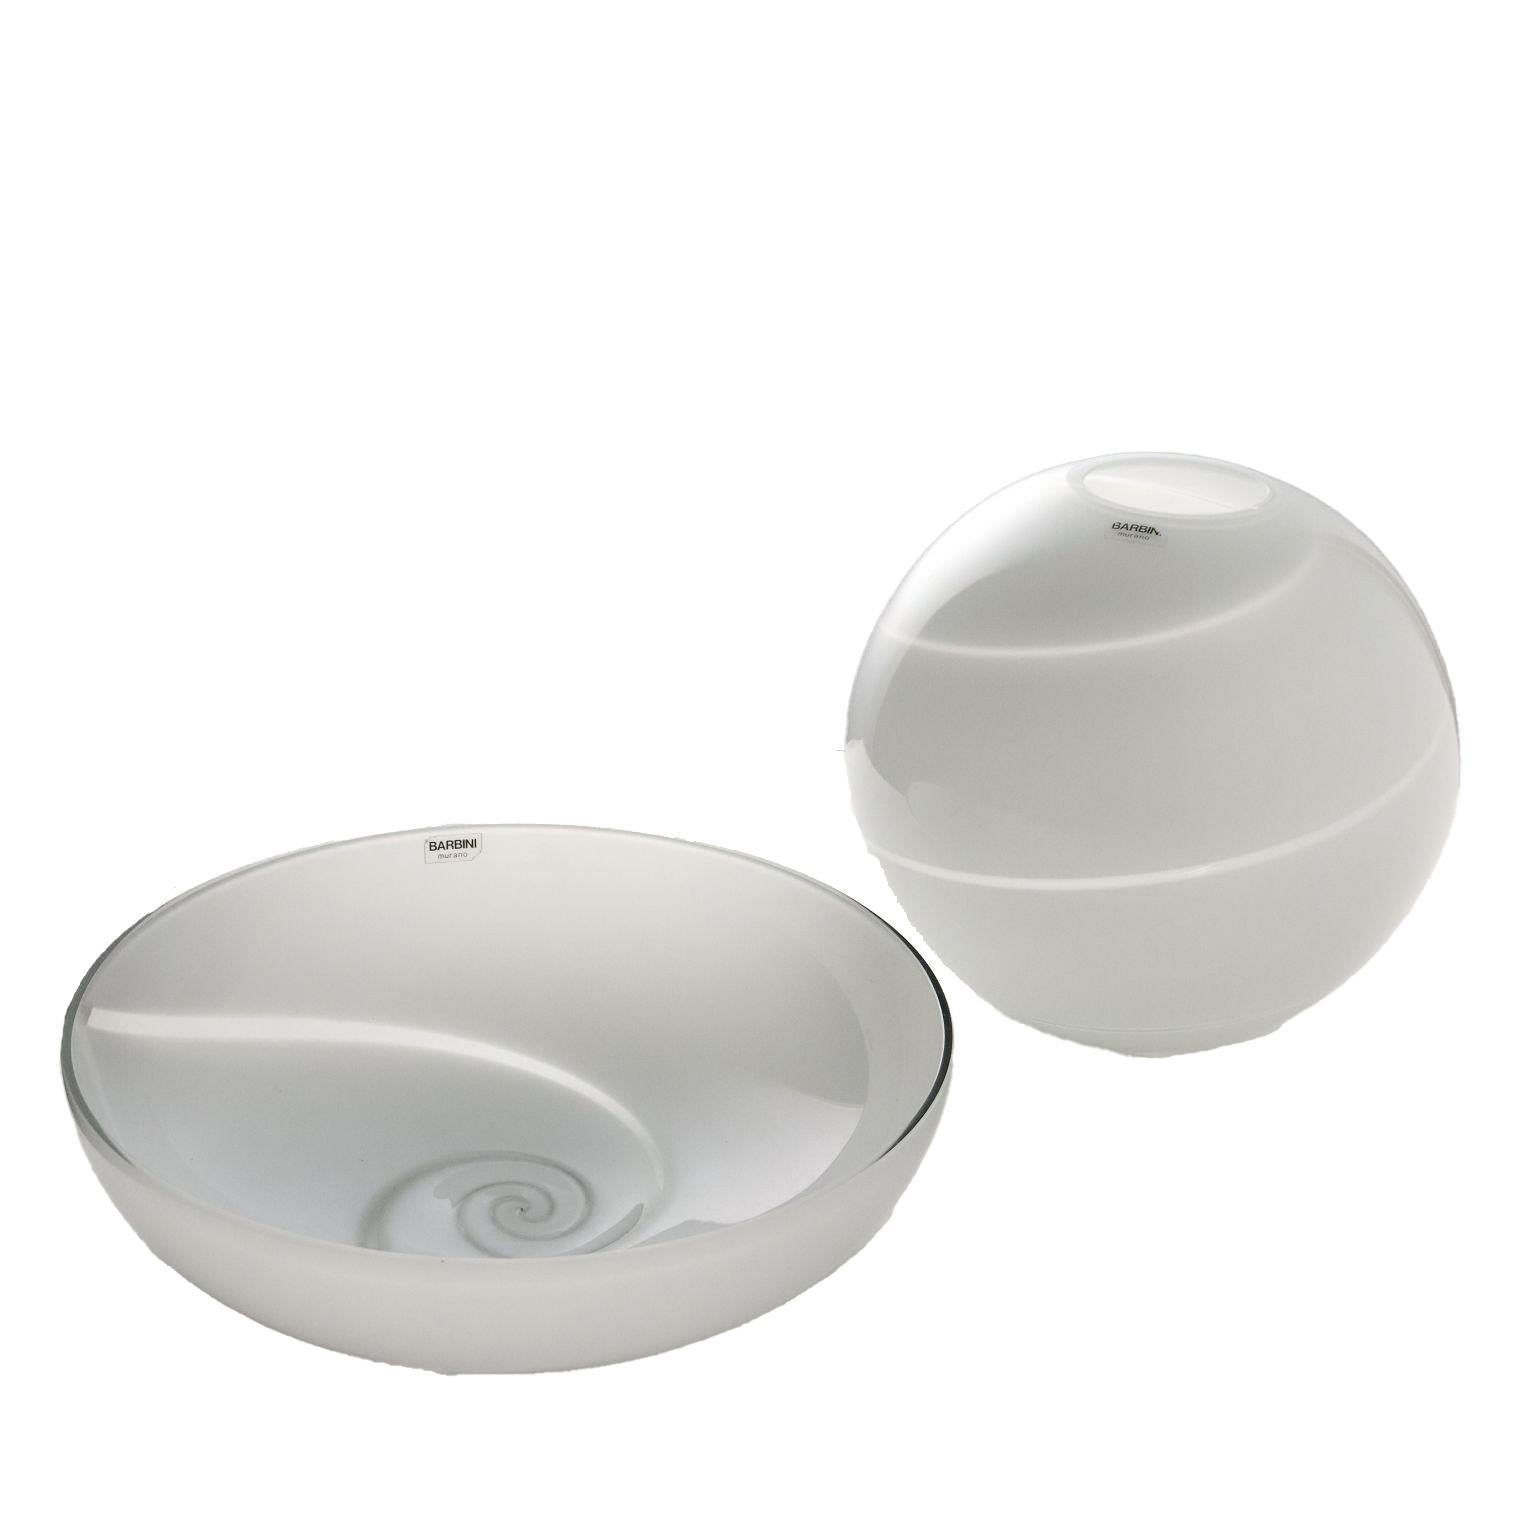 Bowl and sphere vase in colorless and milk glass. Manufacture adhesive label and pointed signature under the base of the bowl.